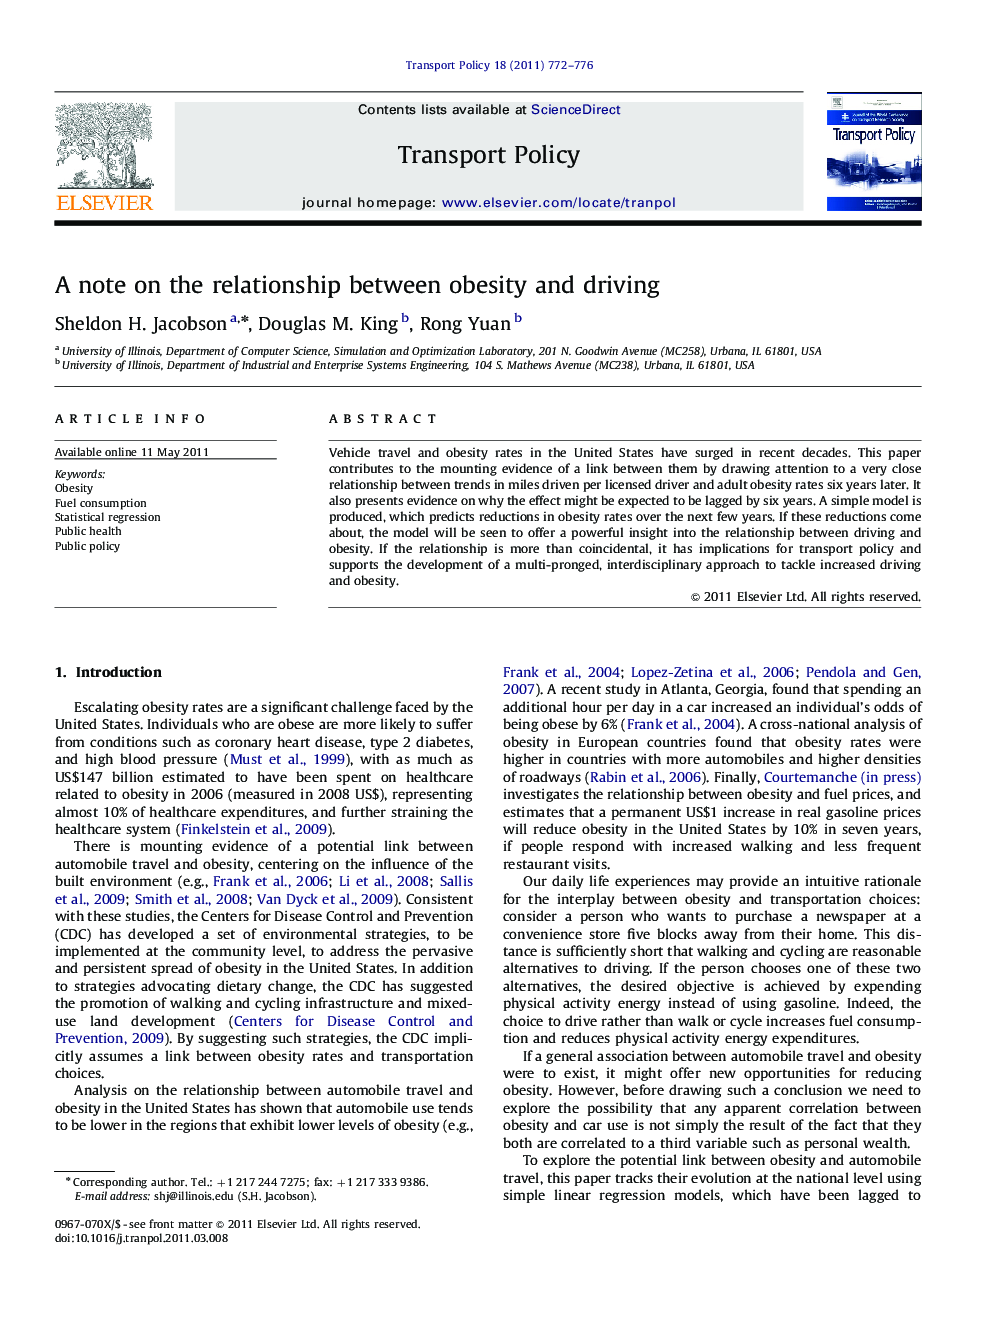 A note on the relationship between obesity and driving